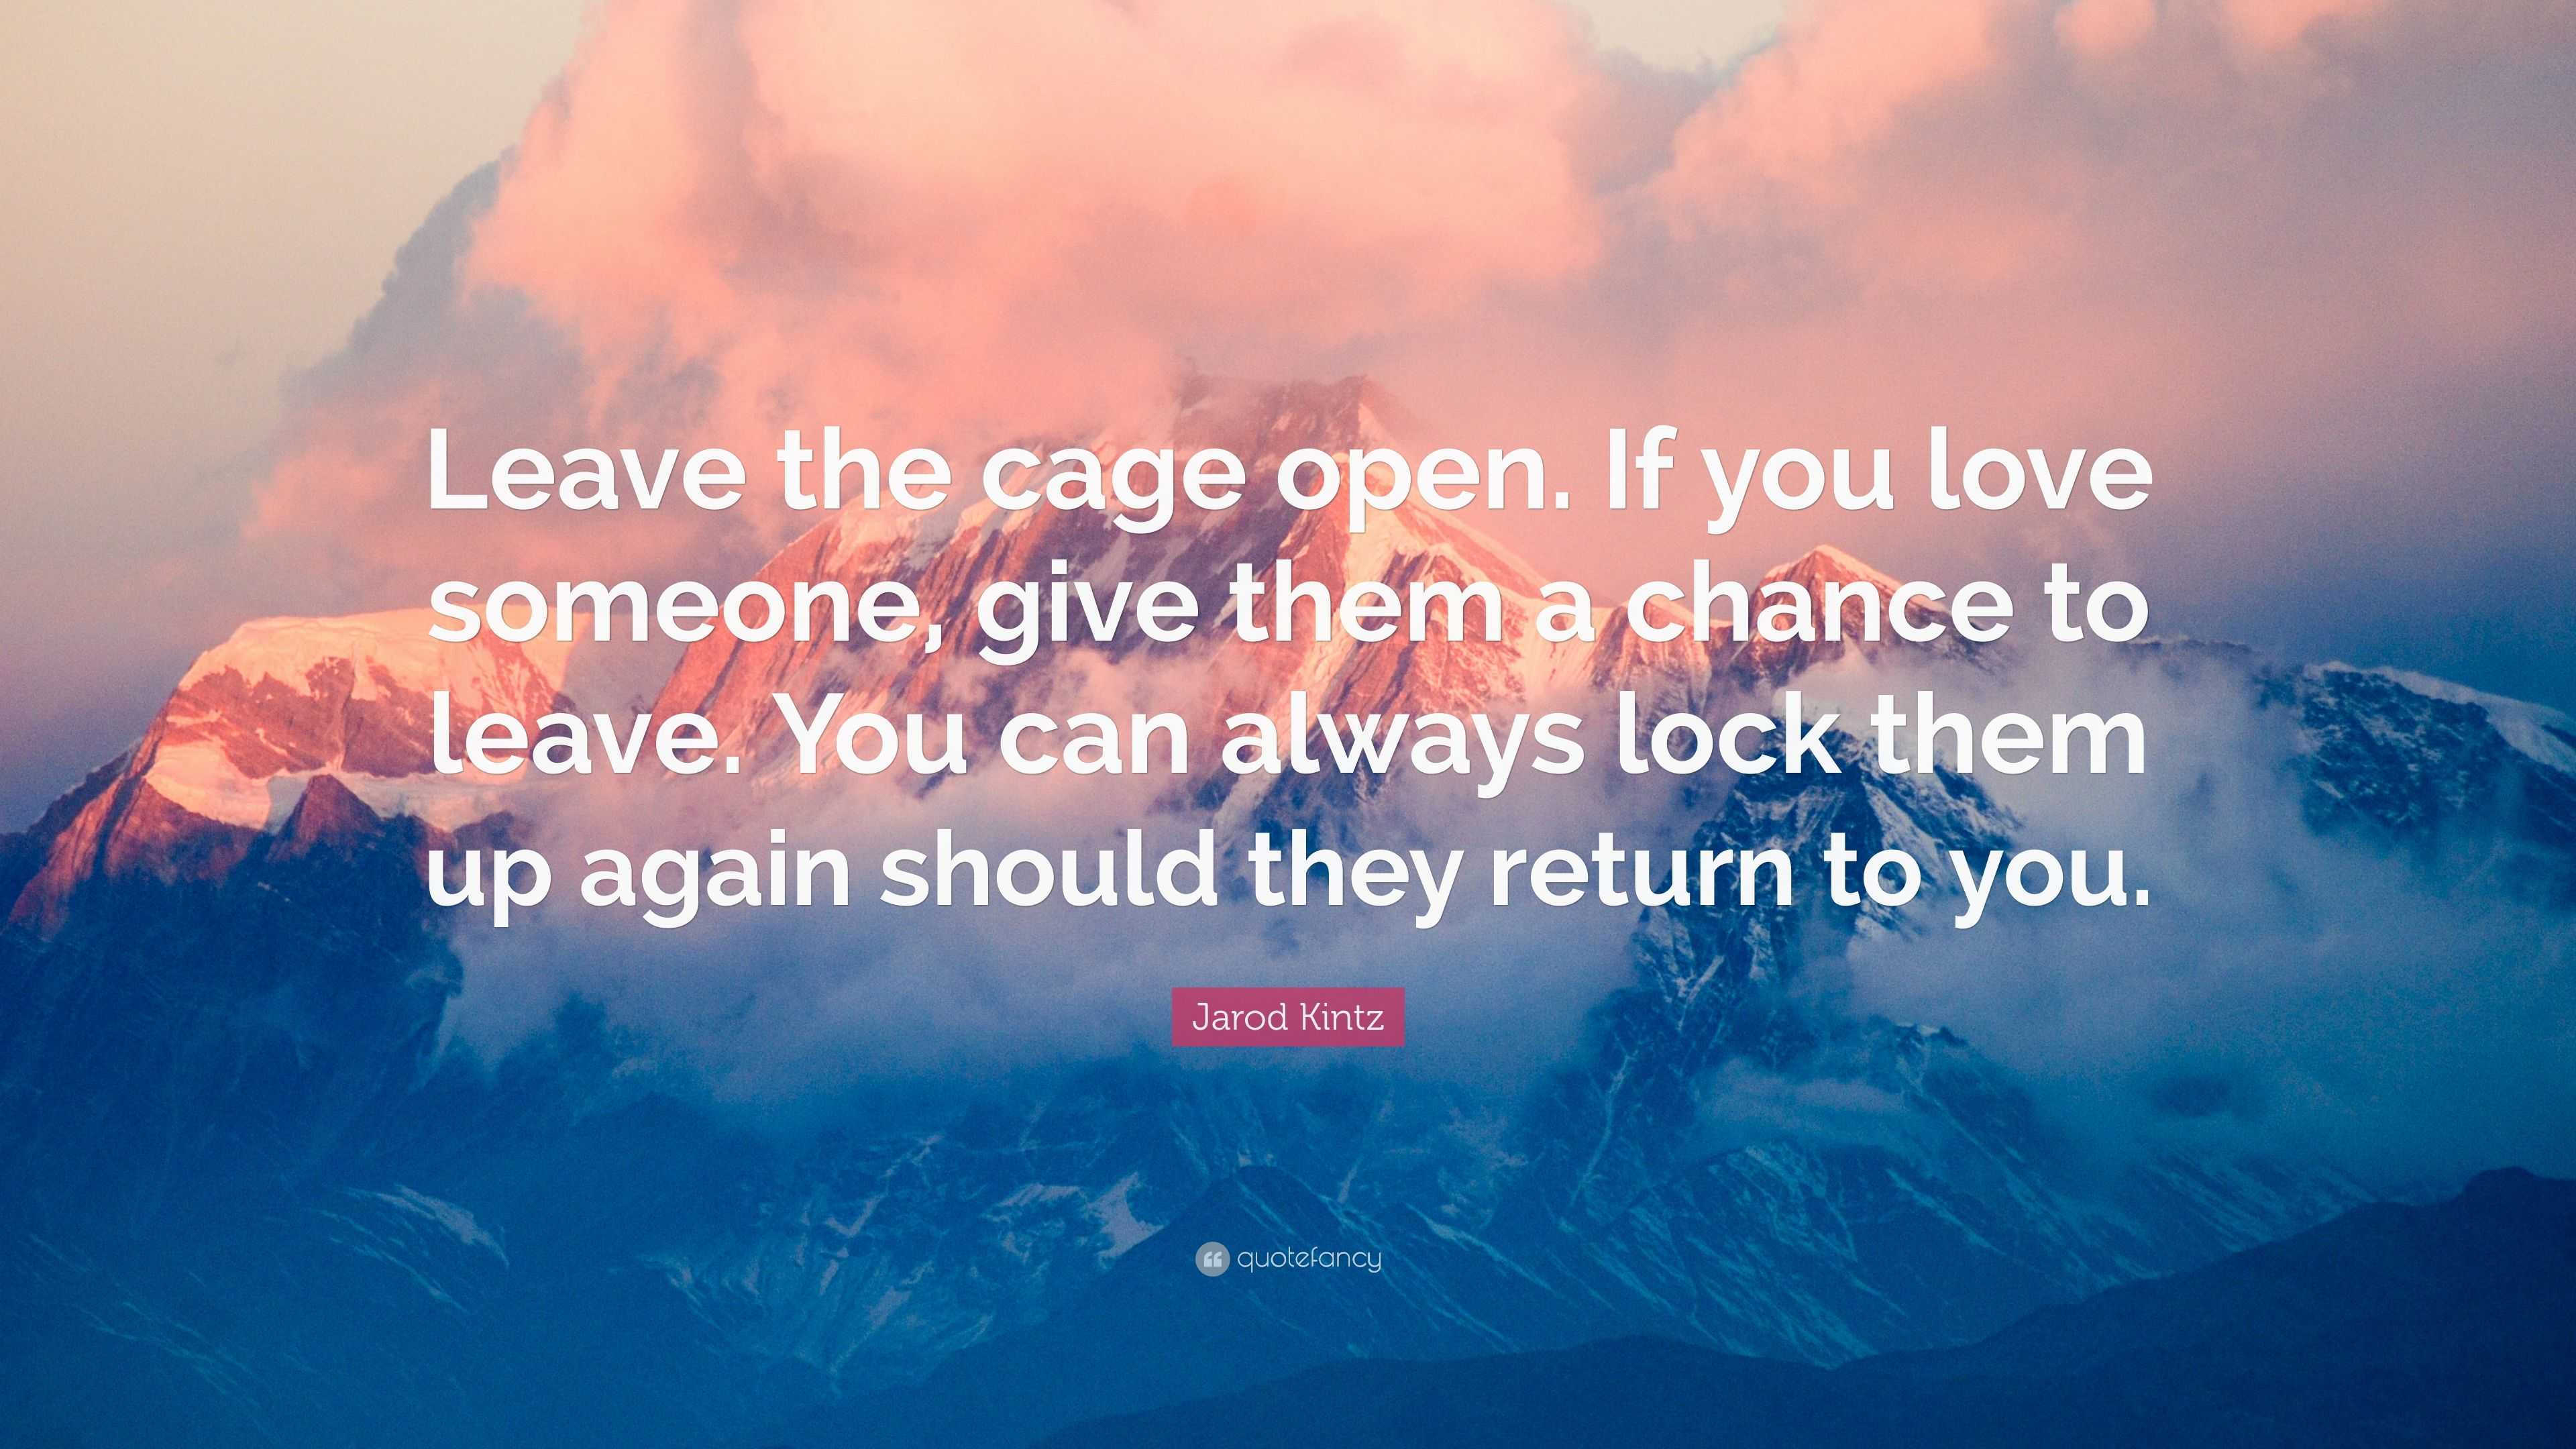 Jarod Kintz Quote “Leave the cage open If you love someone give